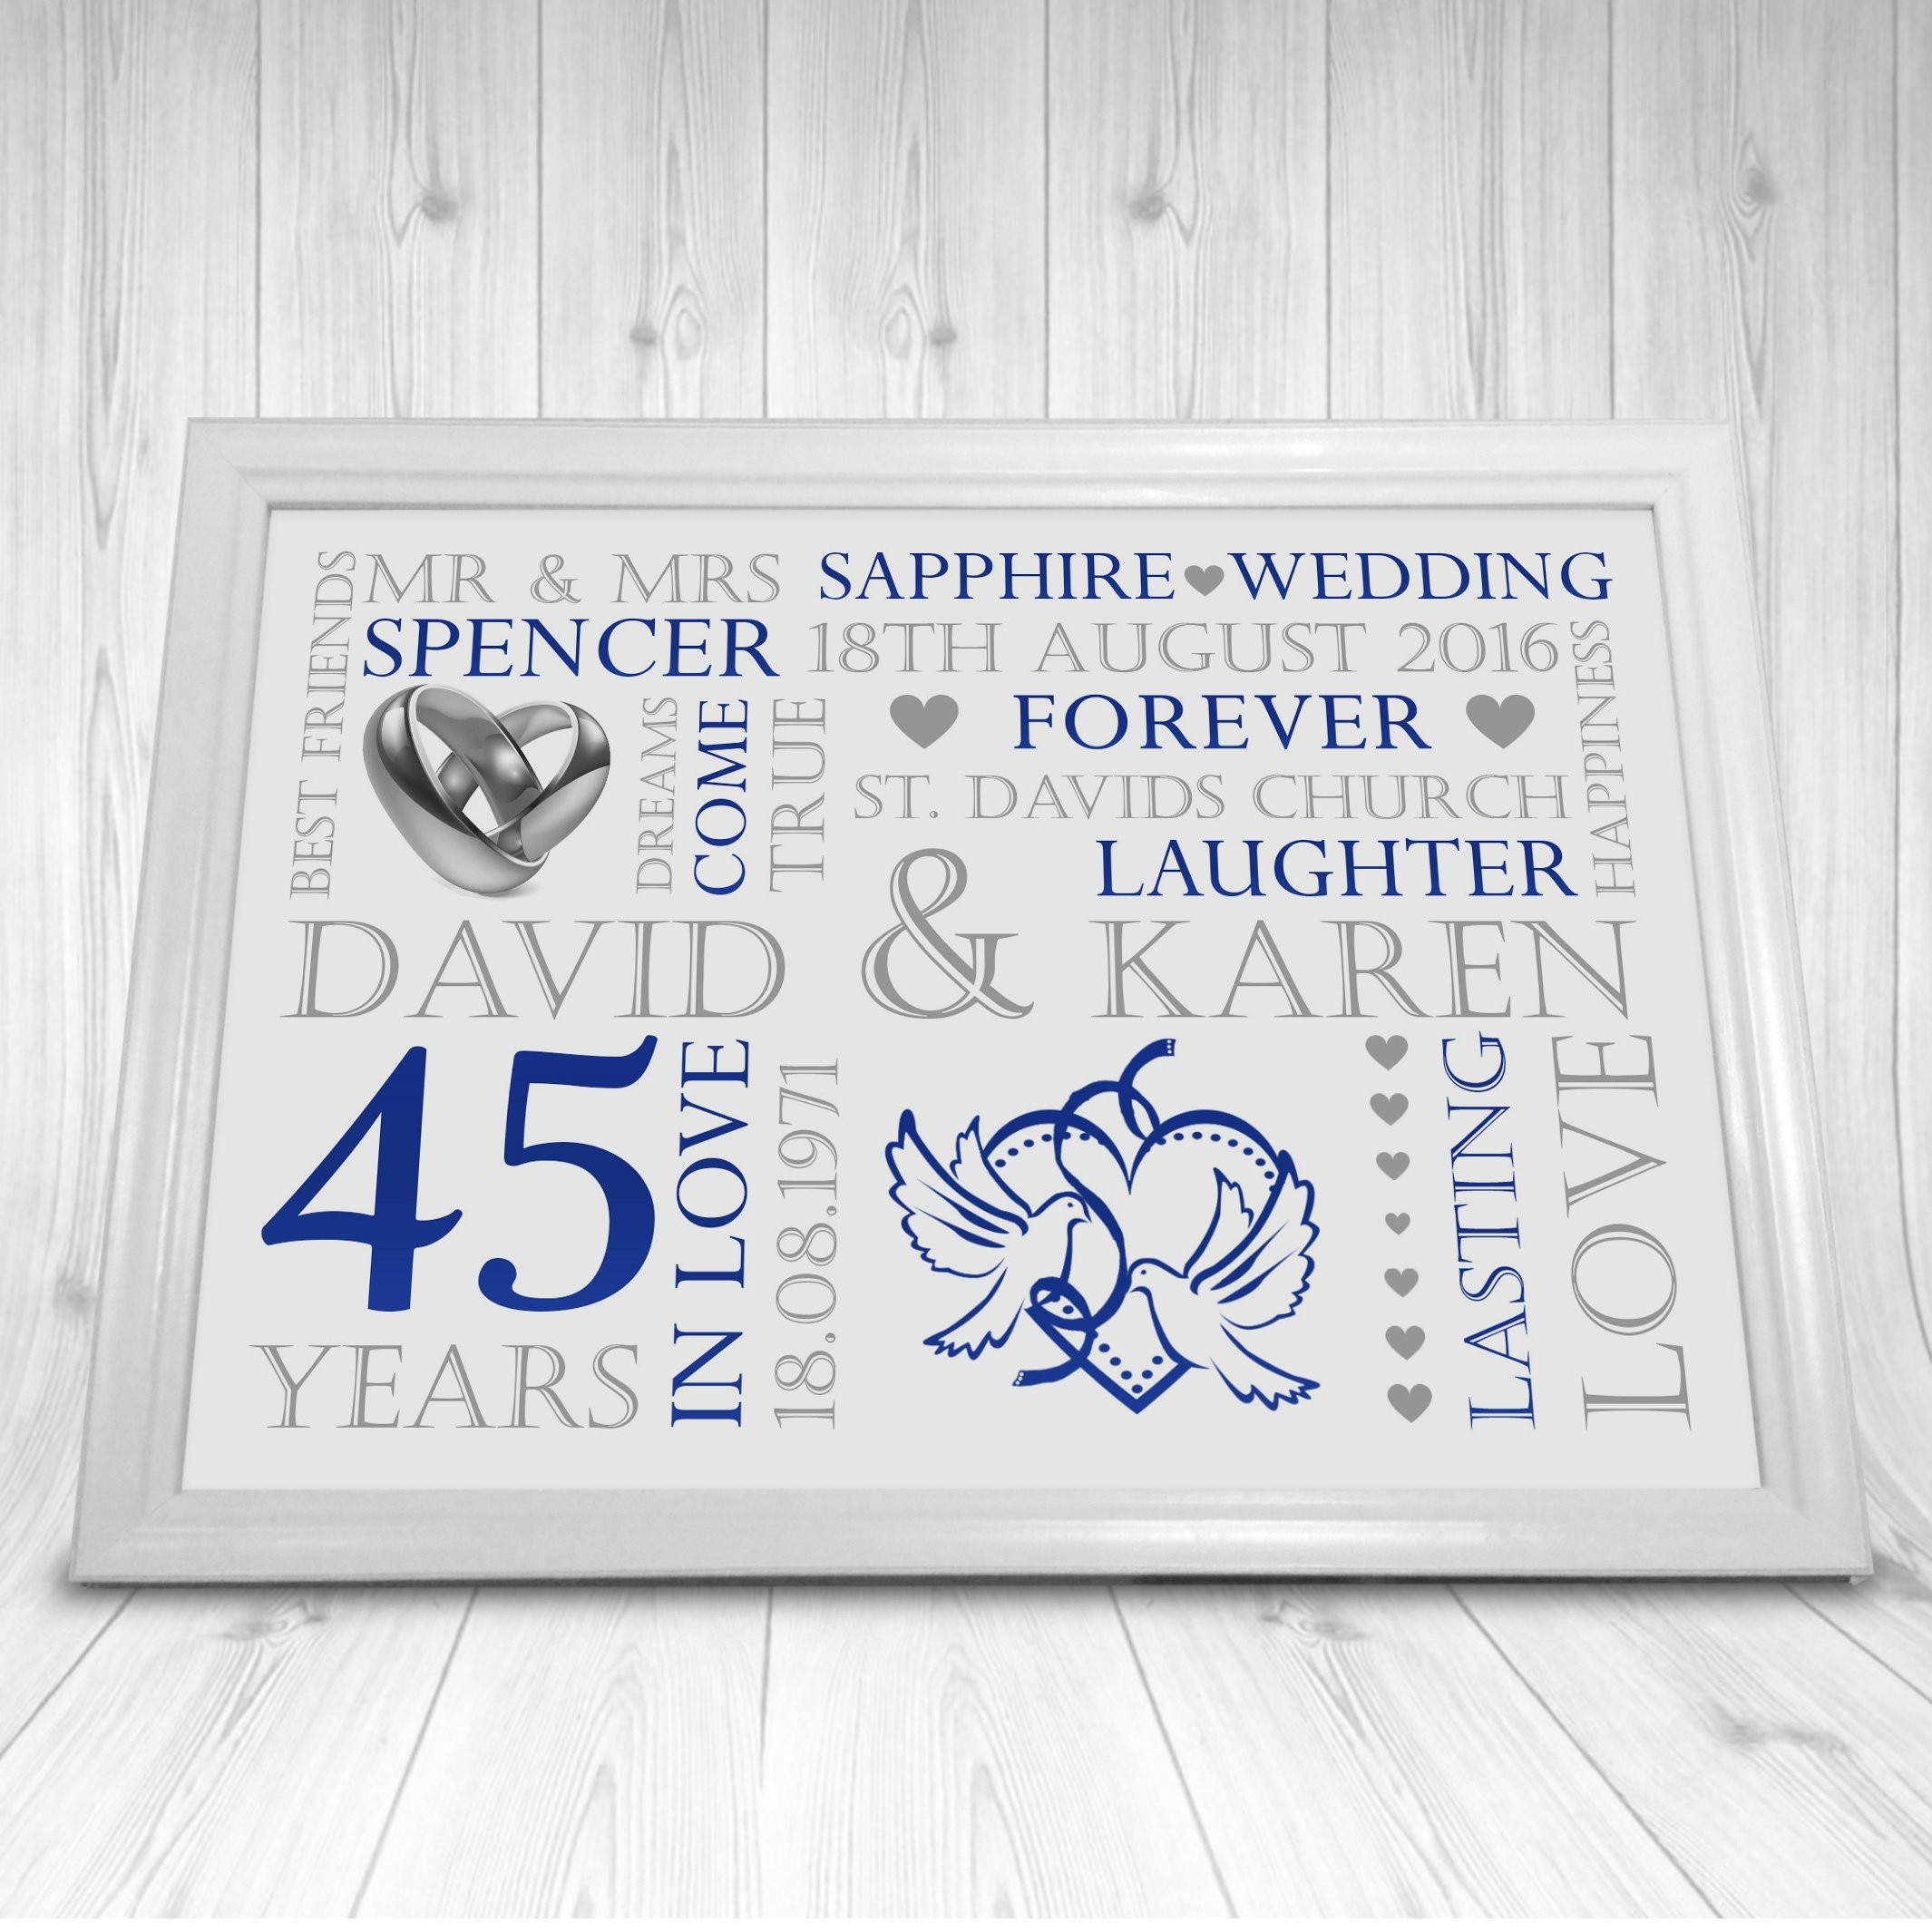 45Th Wedding Anniversary Gift Ideas
 10 Awesome 45Th Wedding Anniversary Gift Ideas 2020